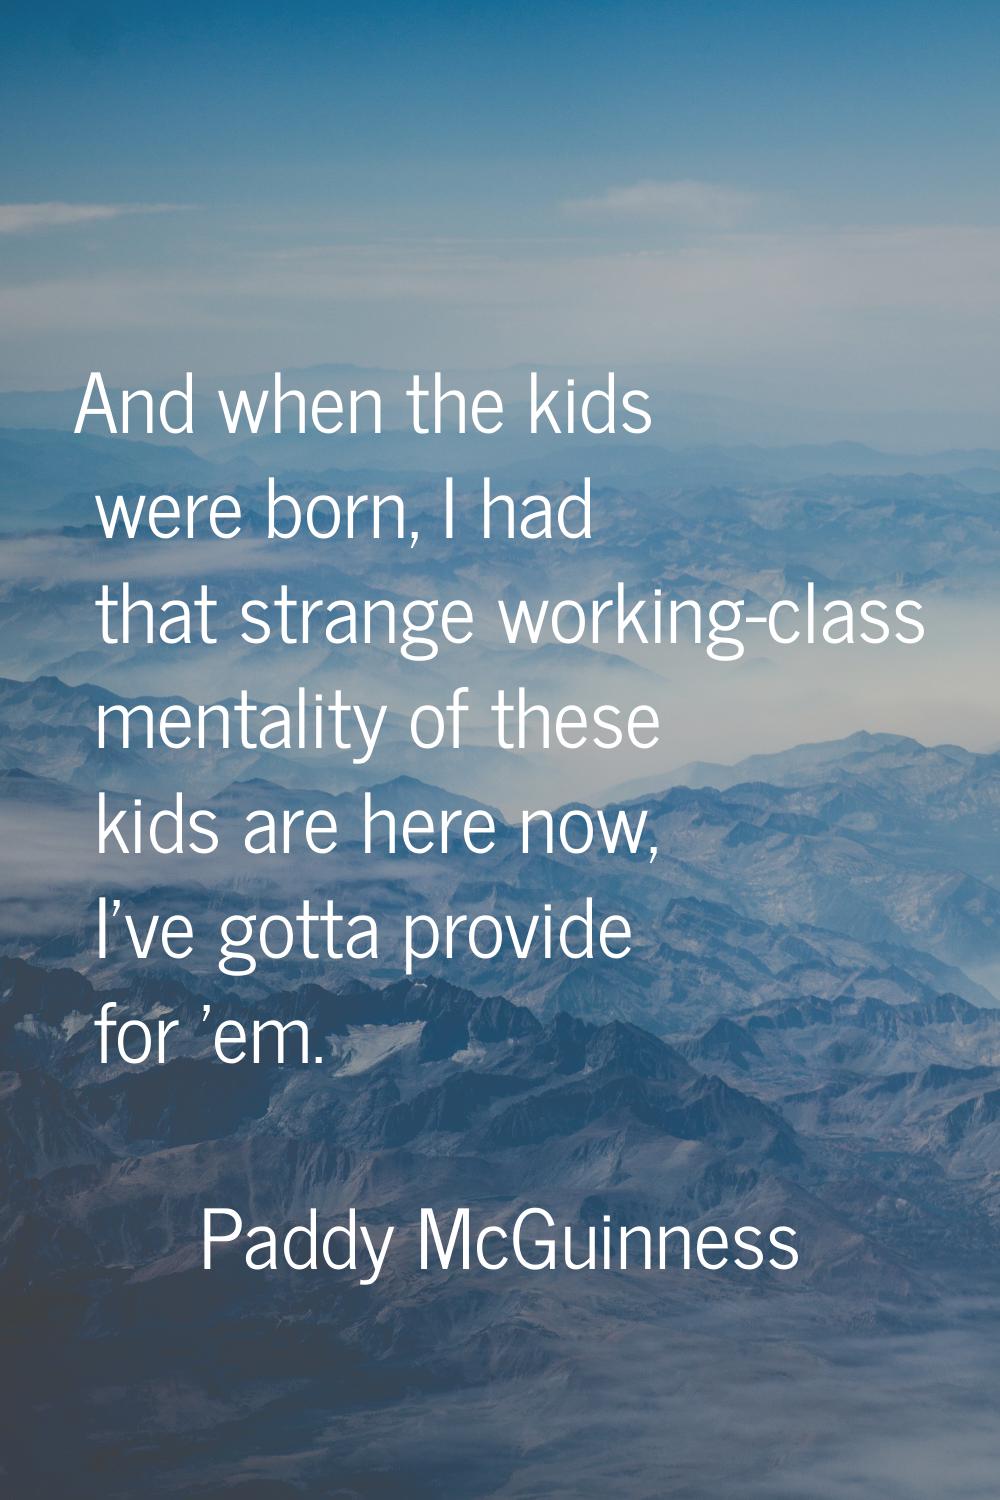 And when the kids were born, I had that strange working-class mentality of these kids are here now,